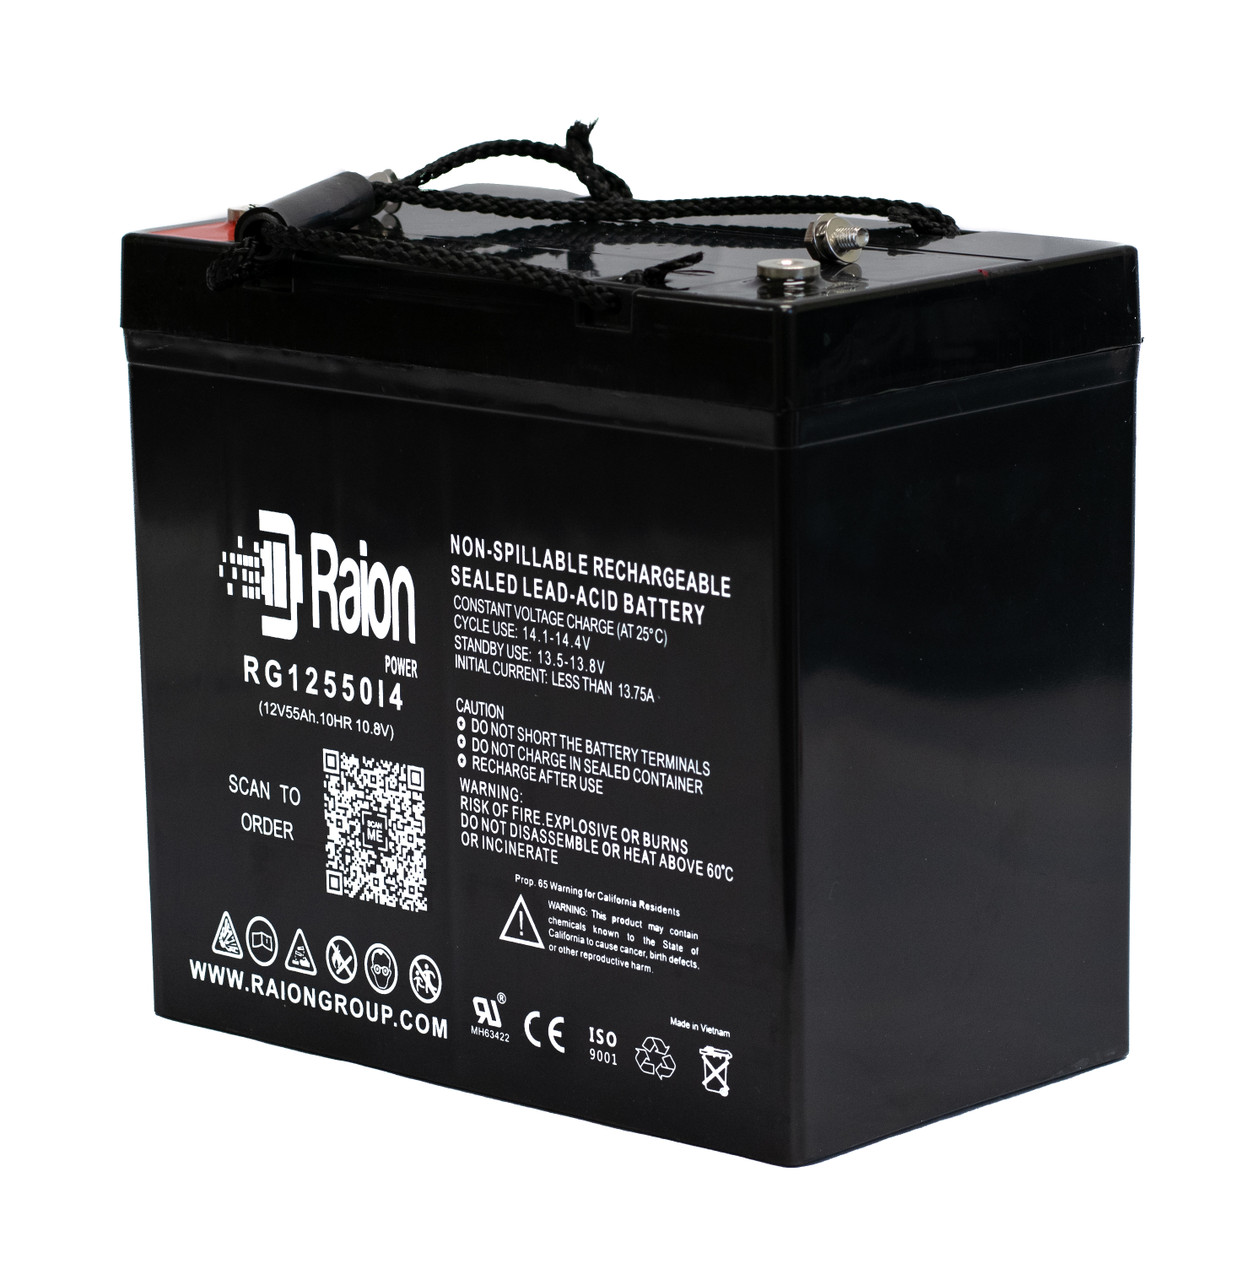 Raion Power 12V 55Ah 22NF Mobility Scooter Battery Replacement for Pride Mobility Jazzy 600 XL